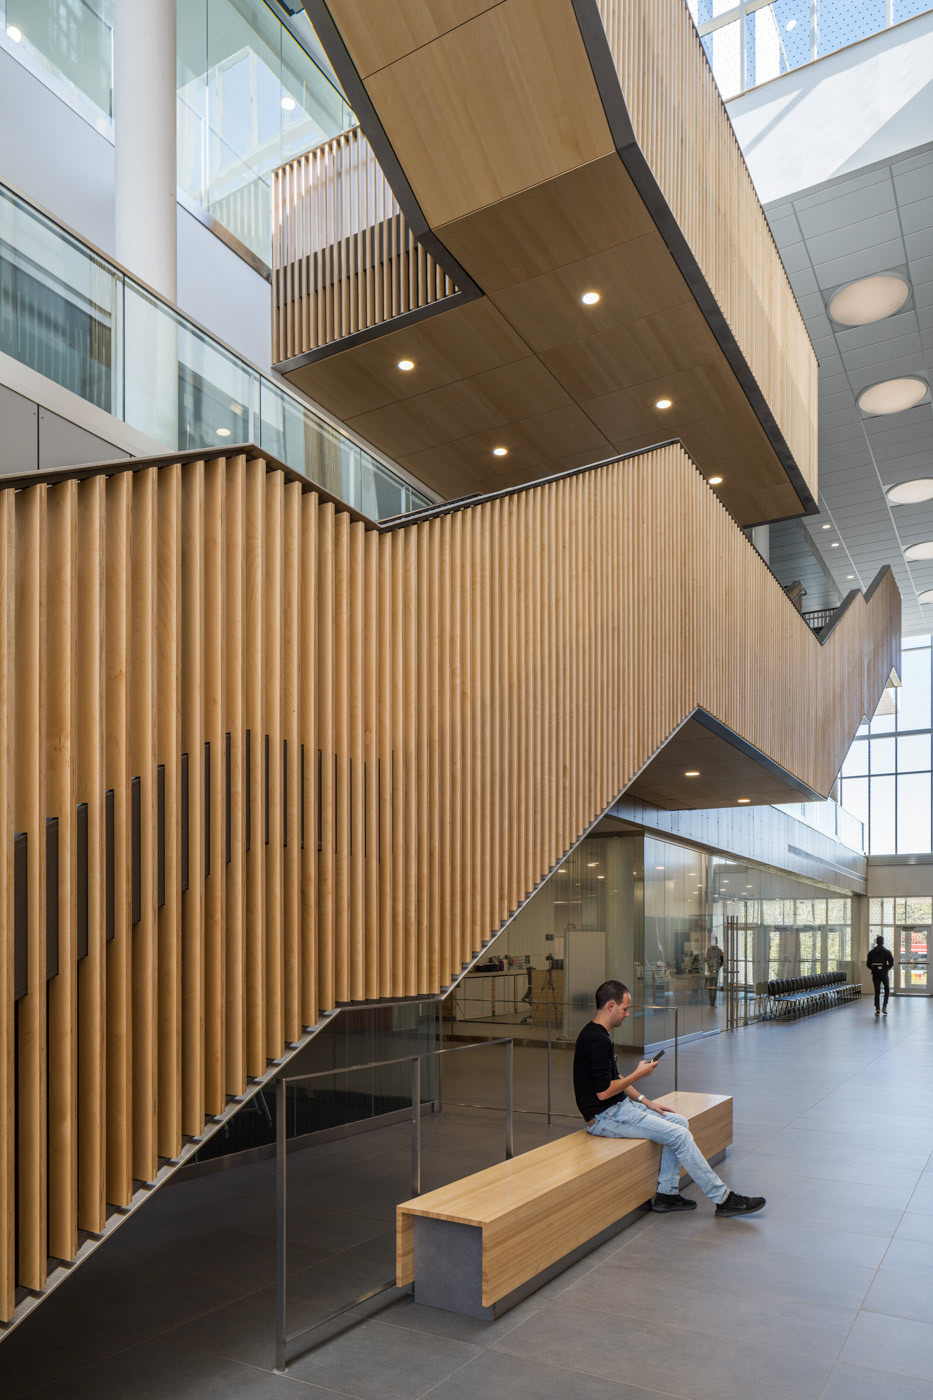 Aquicon perkins and will UTSC university of toronto Highland Hall architectural photography architecture